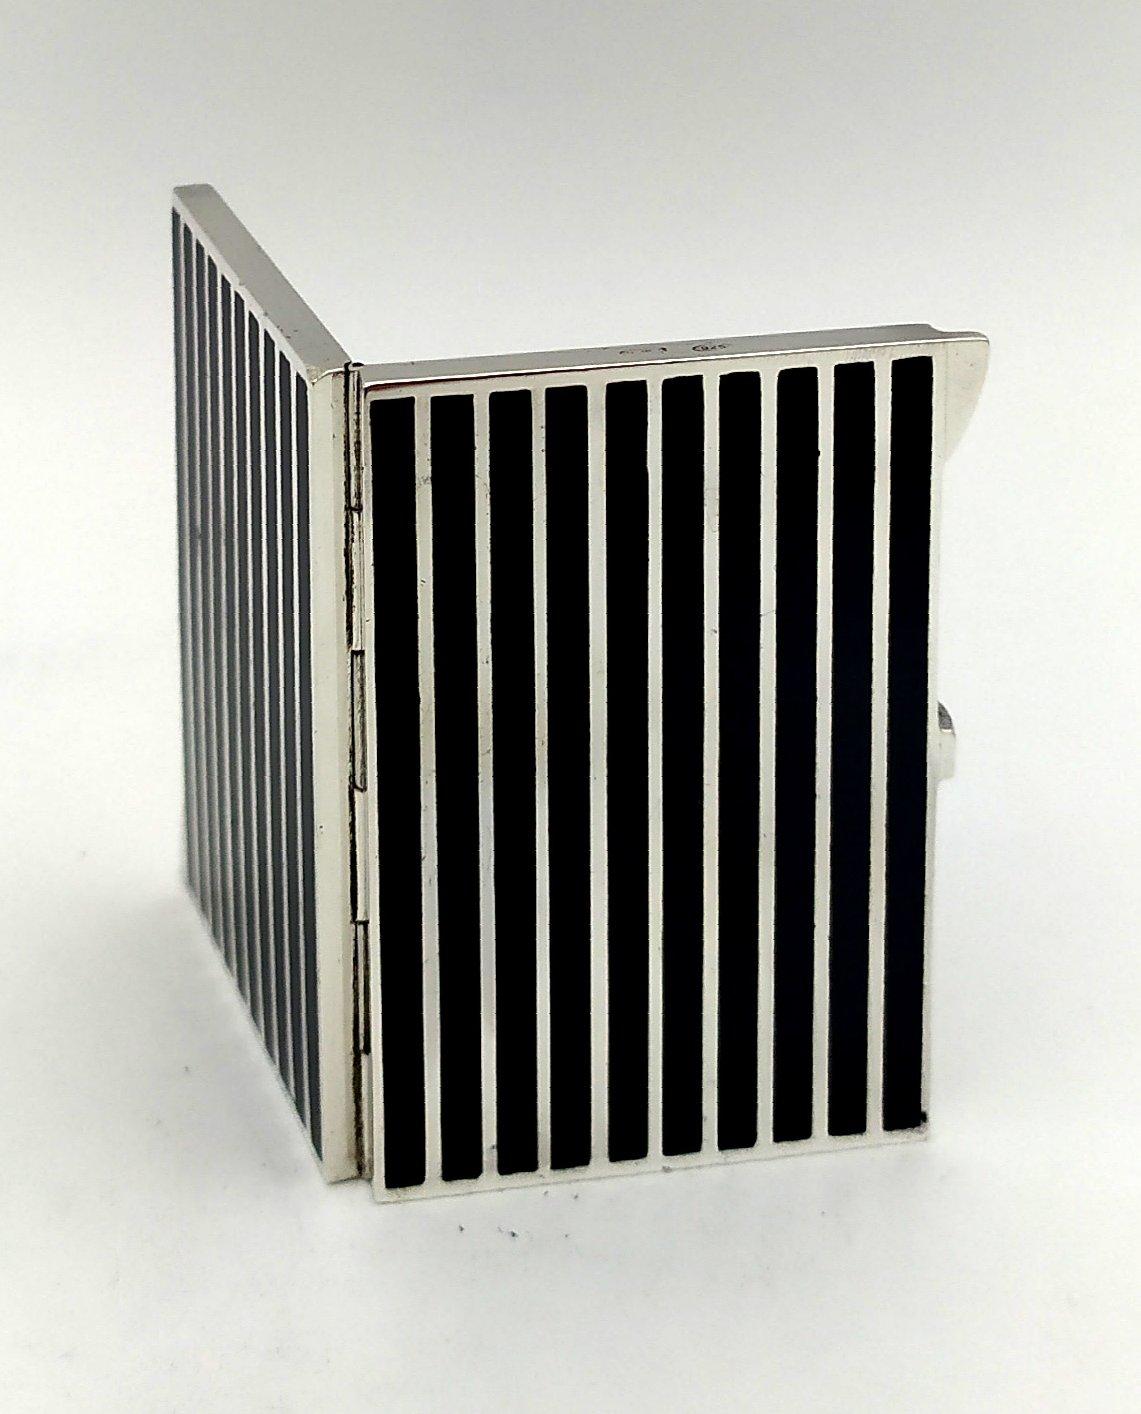 Rectangular travel photo frame with hinged booklet for 2 photos in 925/1000 sterling silver with fire-enamelled stripes in Art Deco style. Measurements cm. 4,5 x 5. Weight gr. 101. Designed by Franco Salimbeni in 1982 and produced in Florence in the